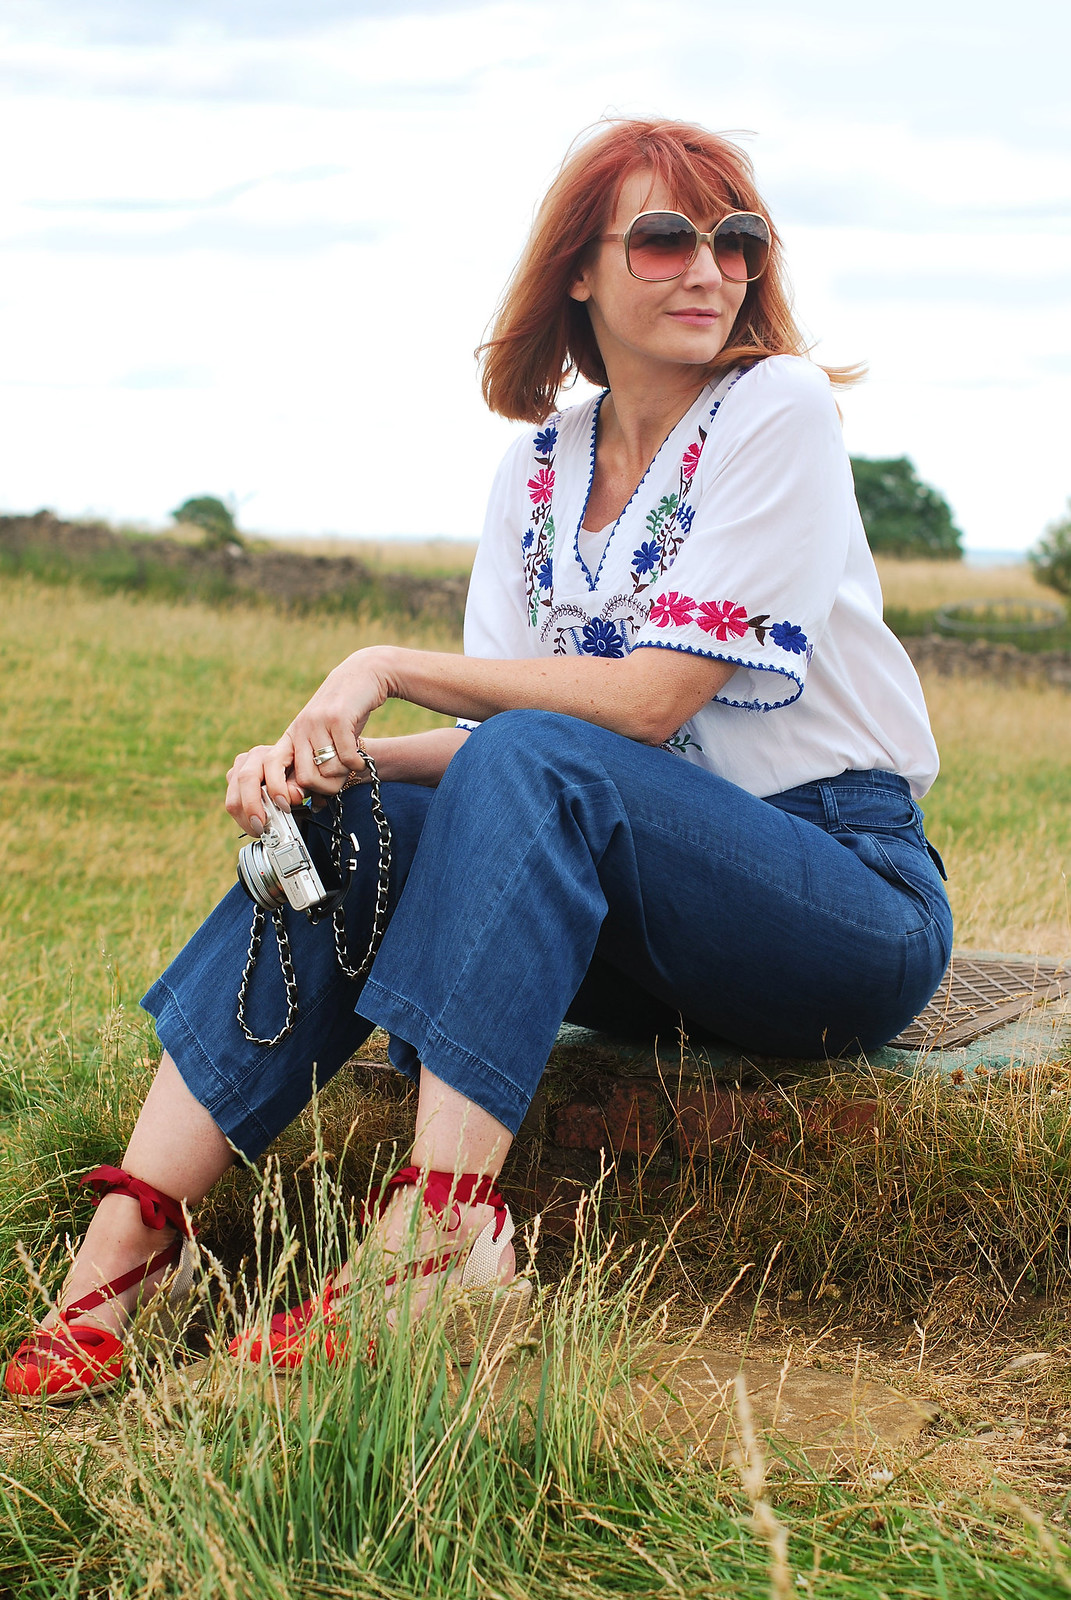 Embroidery and denim: Greek-style embroidered top, wide leg jeans, red lace-up espadrilles | Broadway Tower, The Cotswolds | Not Dressed As Lamb